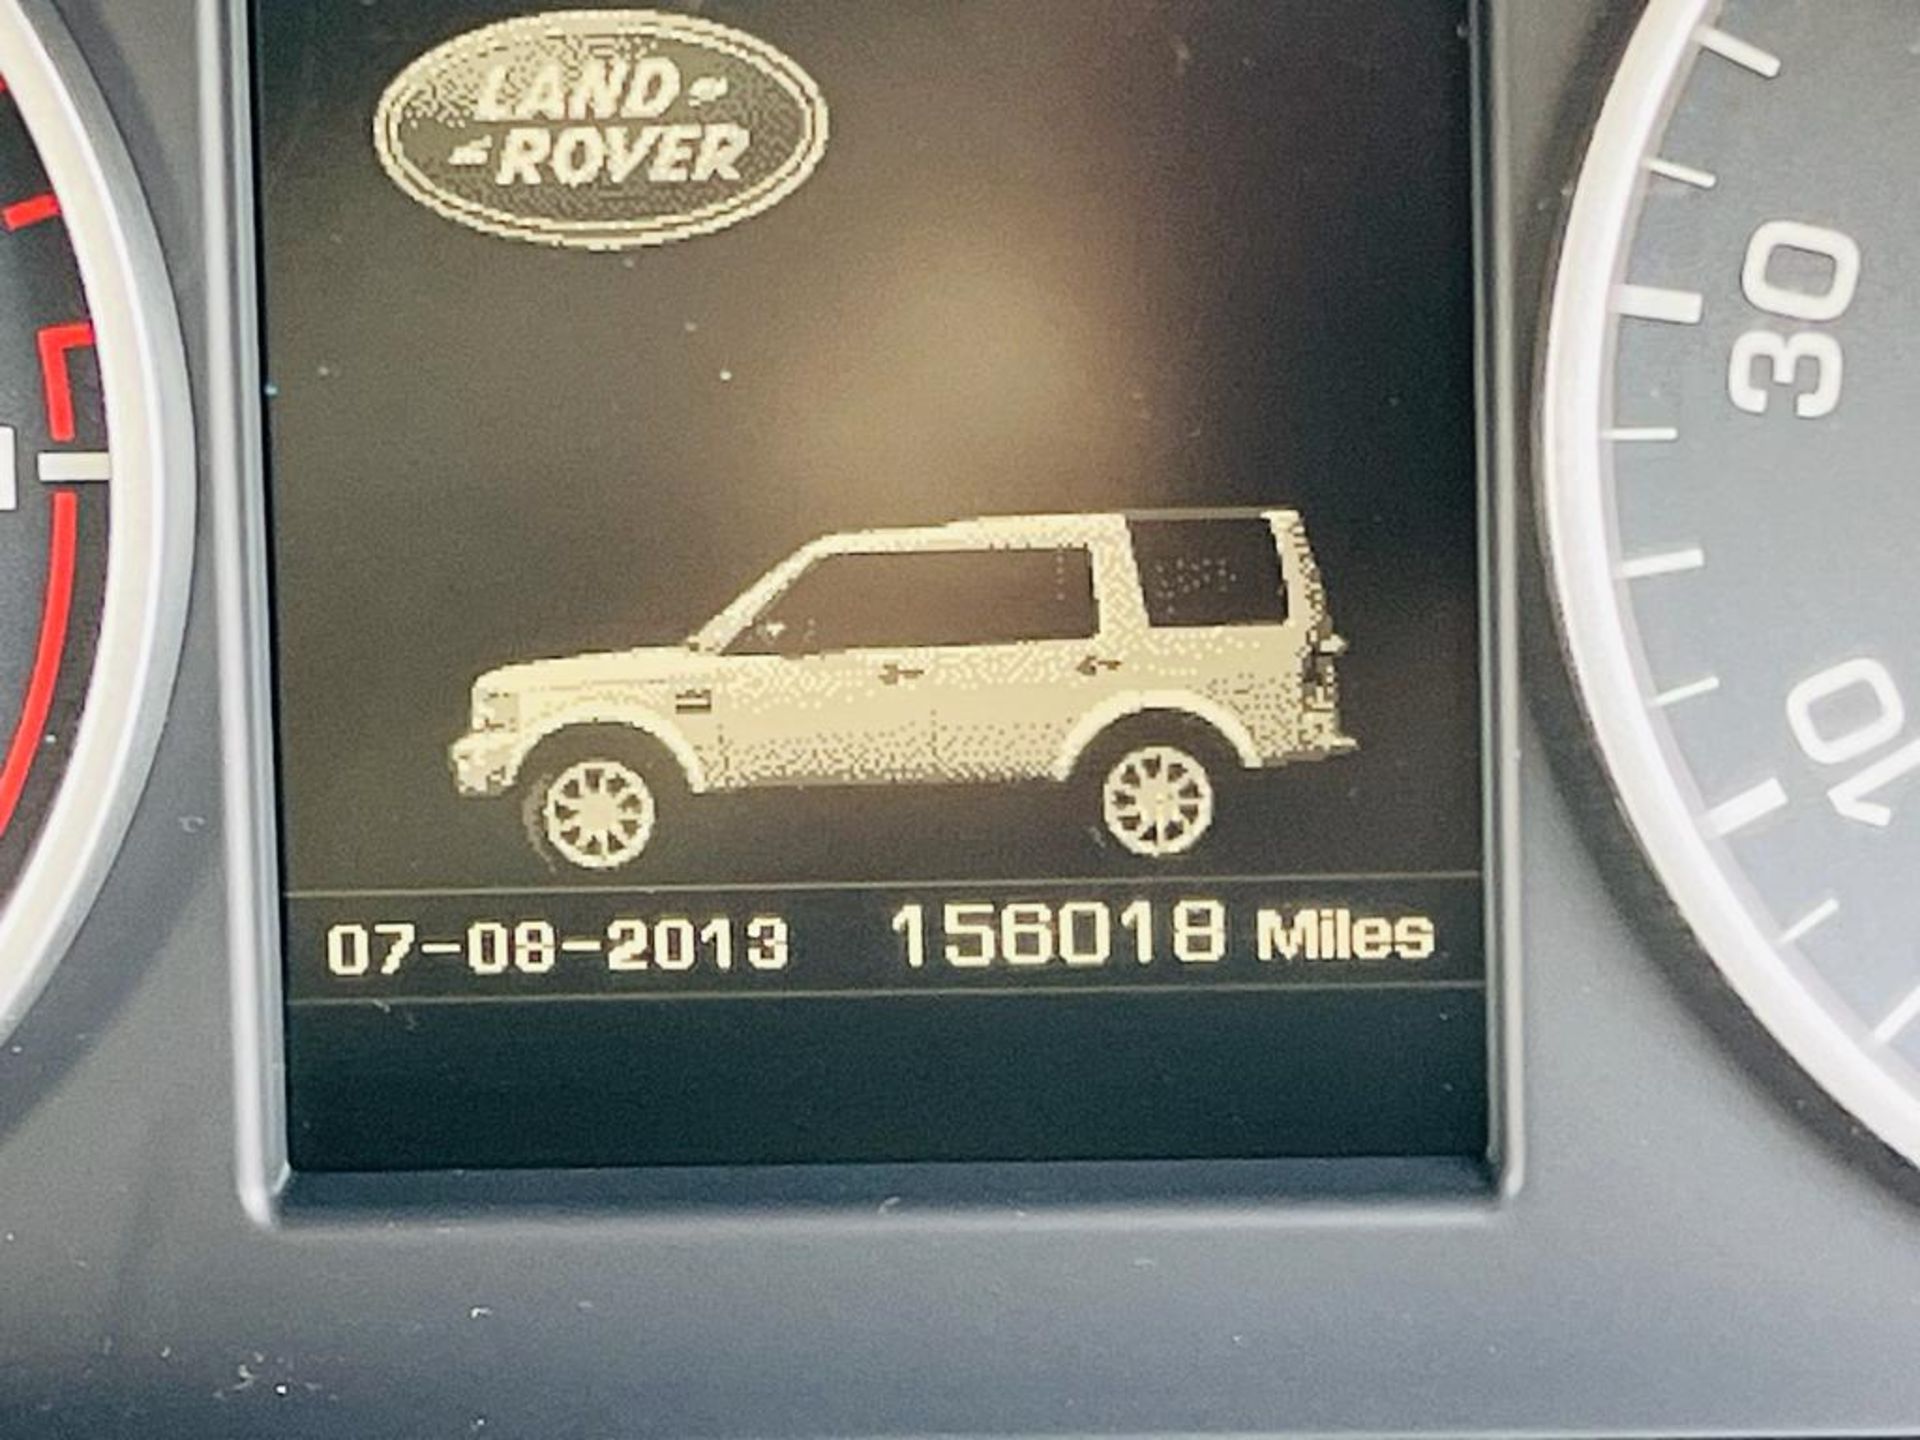 Land Rover Discovery 4 3.0 SDV6 XS CommandShift 2014 '14 Reg' Sat Nav - A/C - 4WD - Commercial - Image 31 of 31